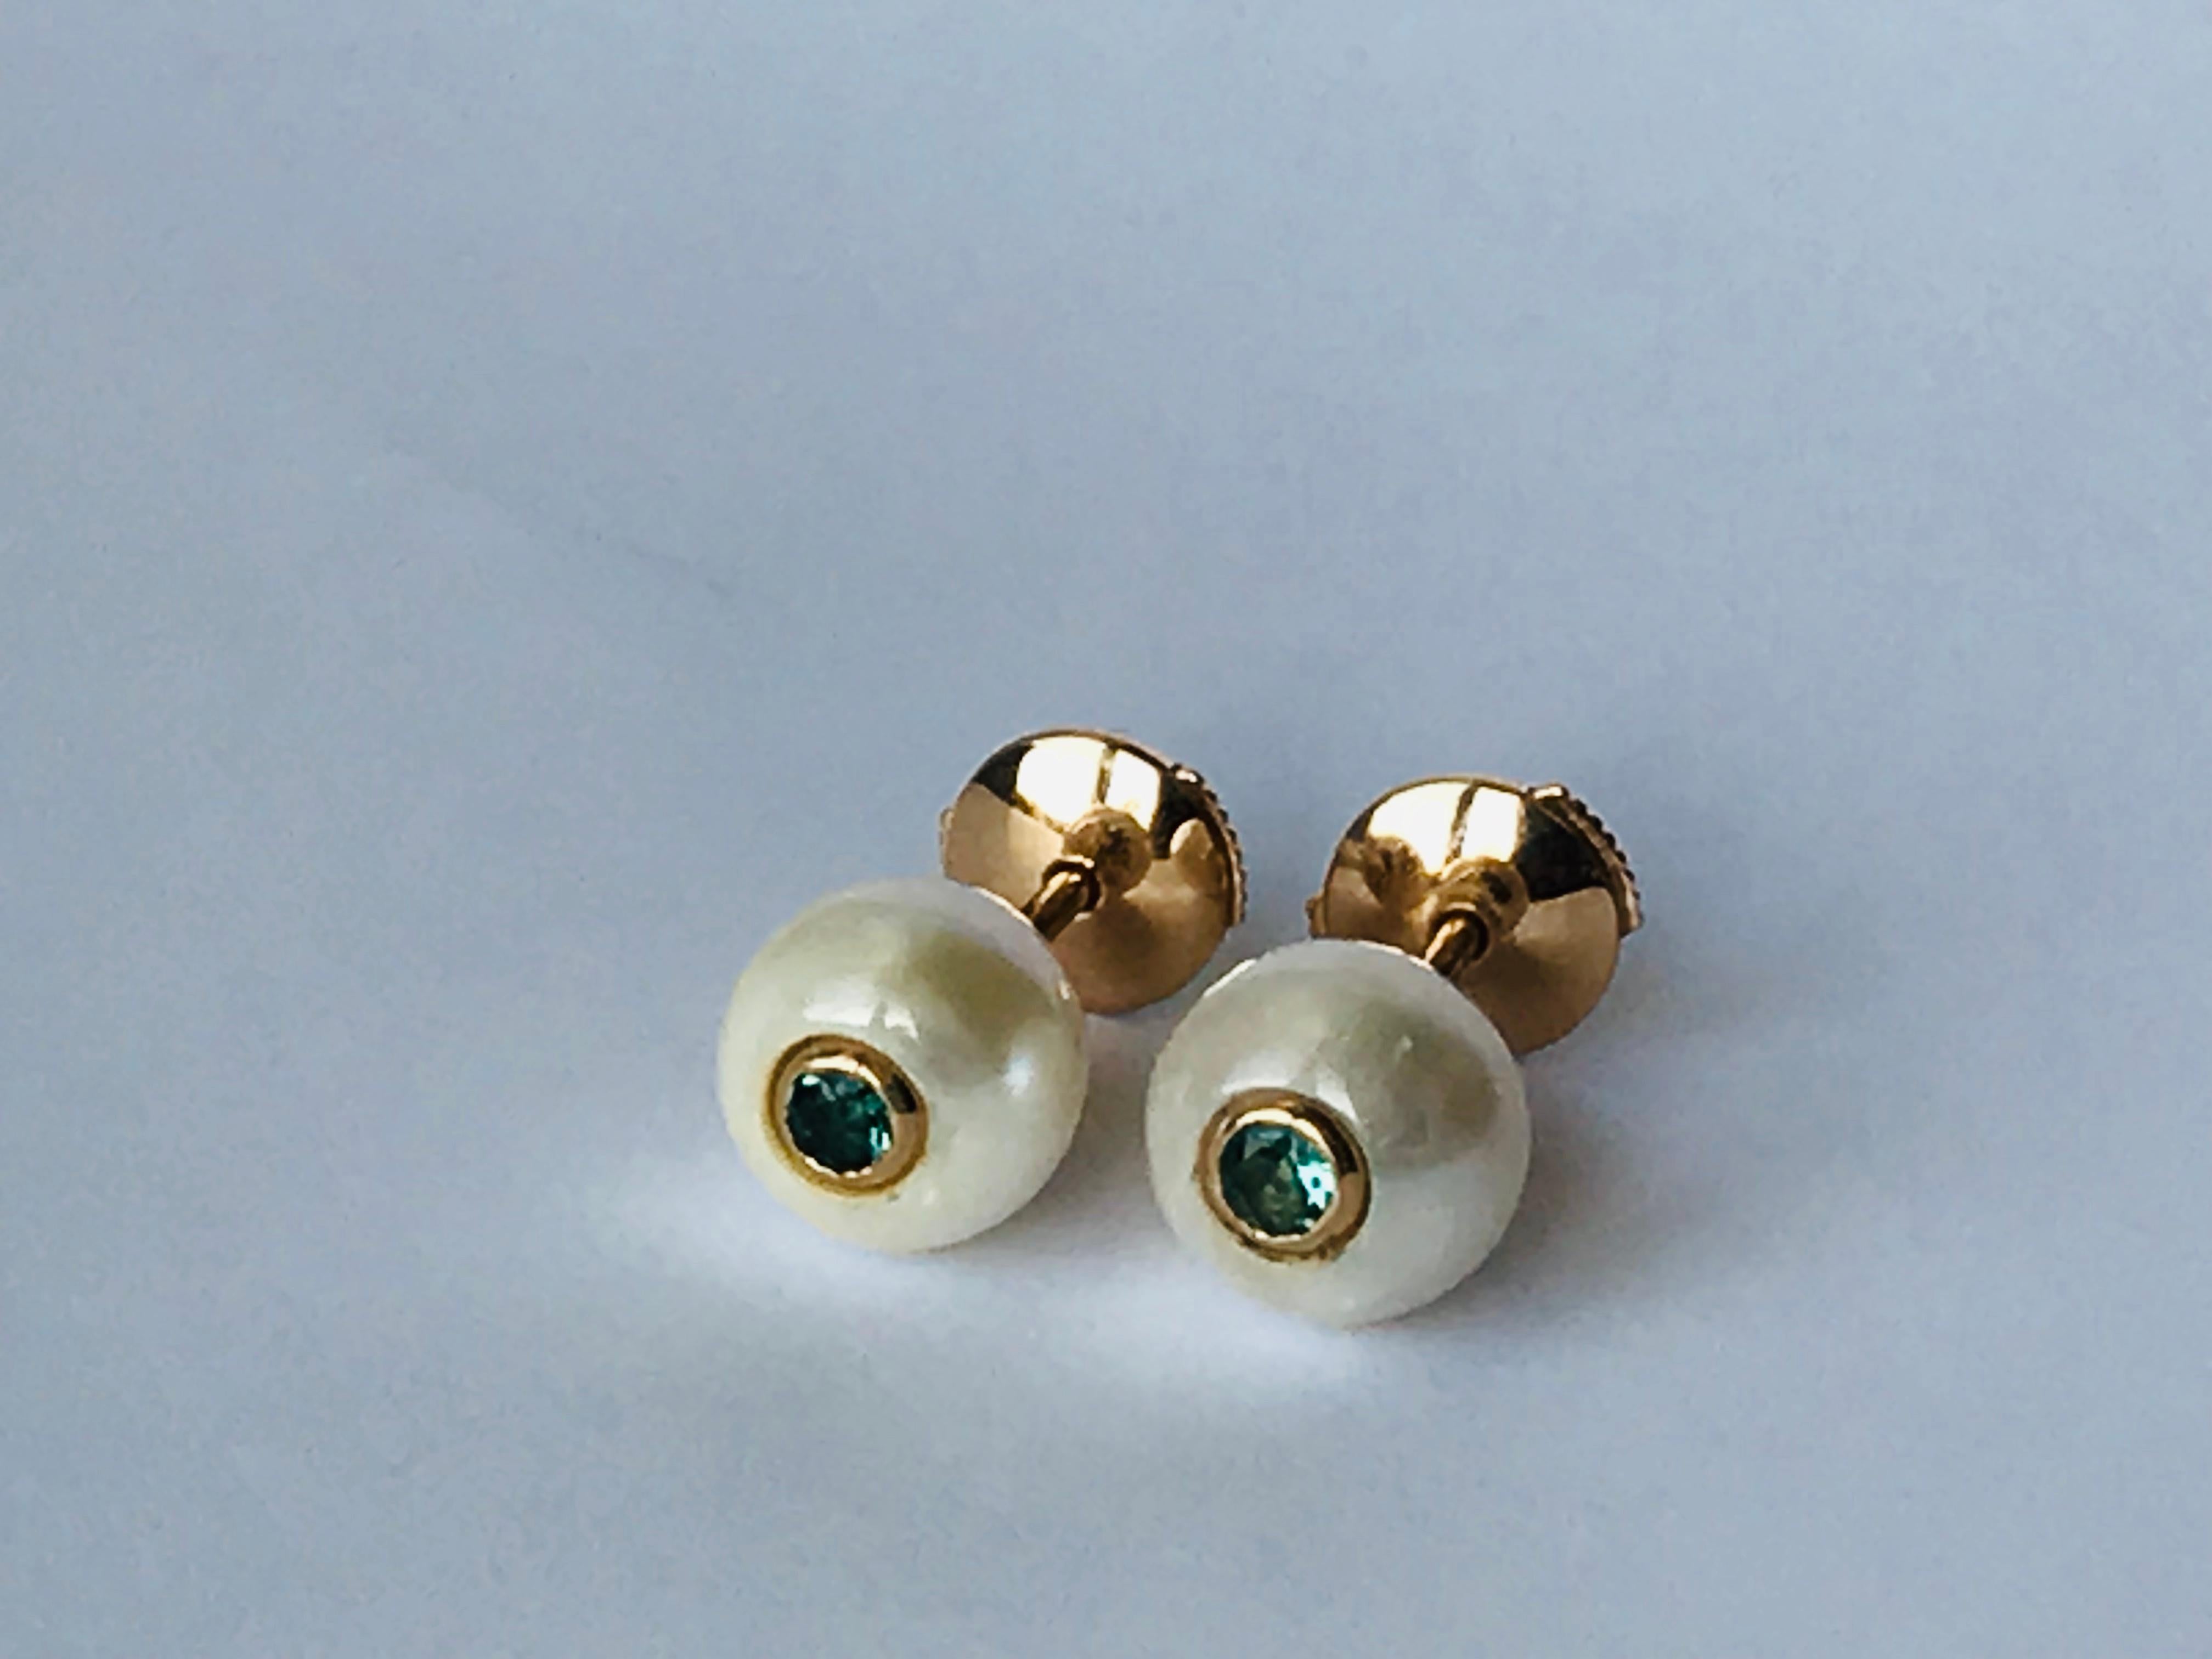 Modern 18K Rose Gold, Pearls and Tourmalines pair of Stud Earrings by Frédérique Berman